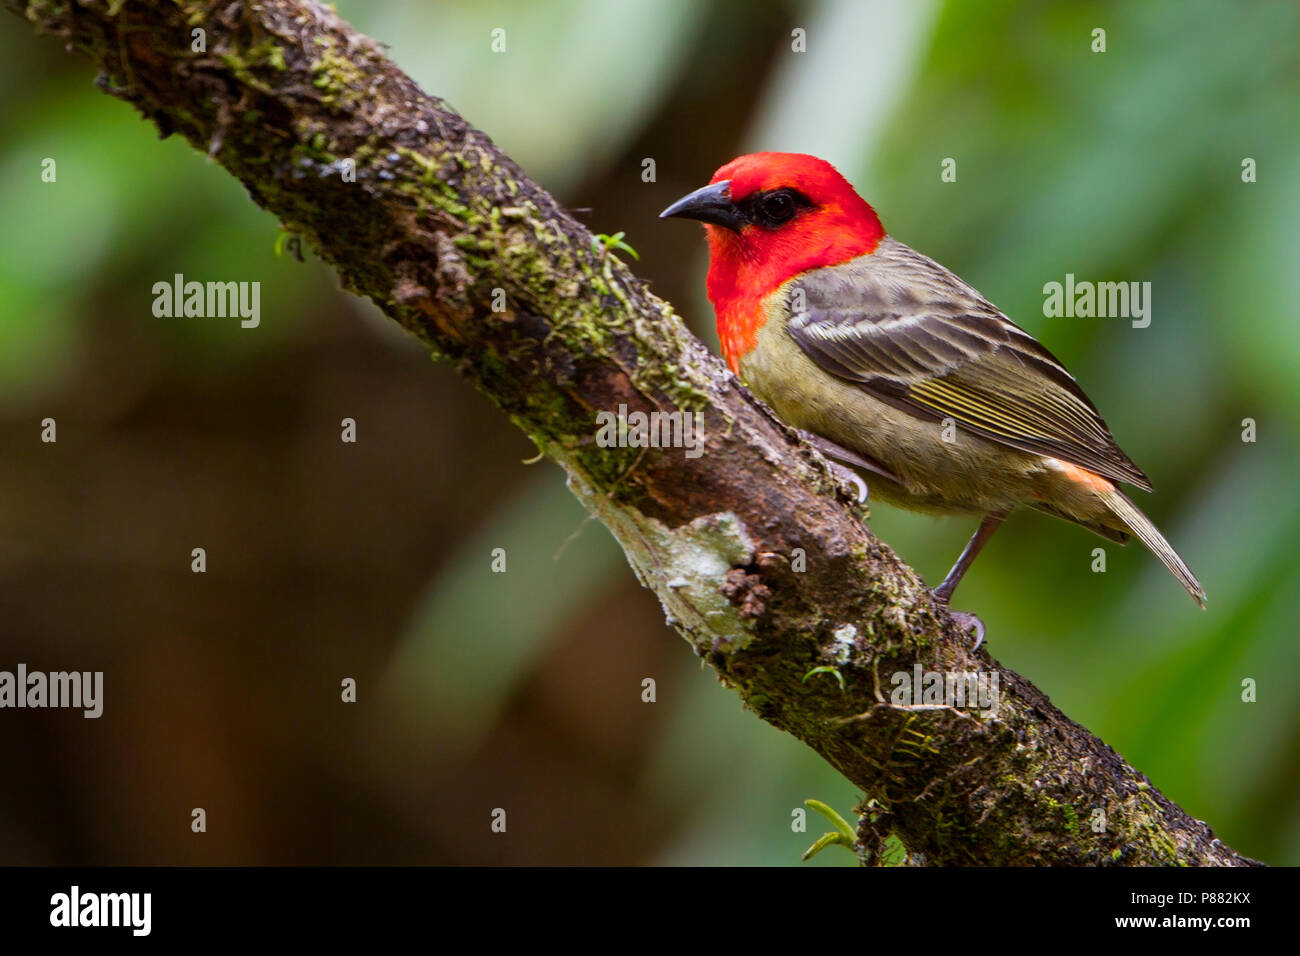 Mauritius Fody (Foudia rubra) and endemic species of bird from Mauritius. Stock Photo